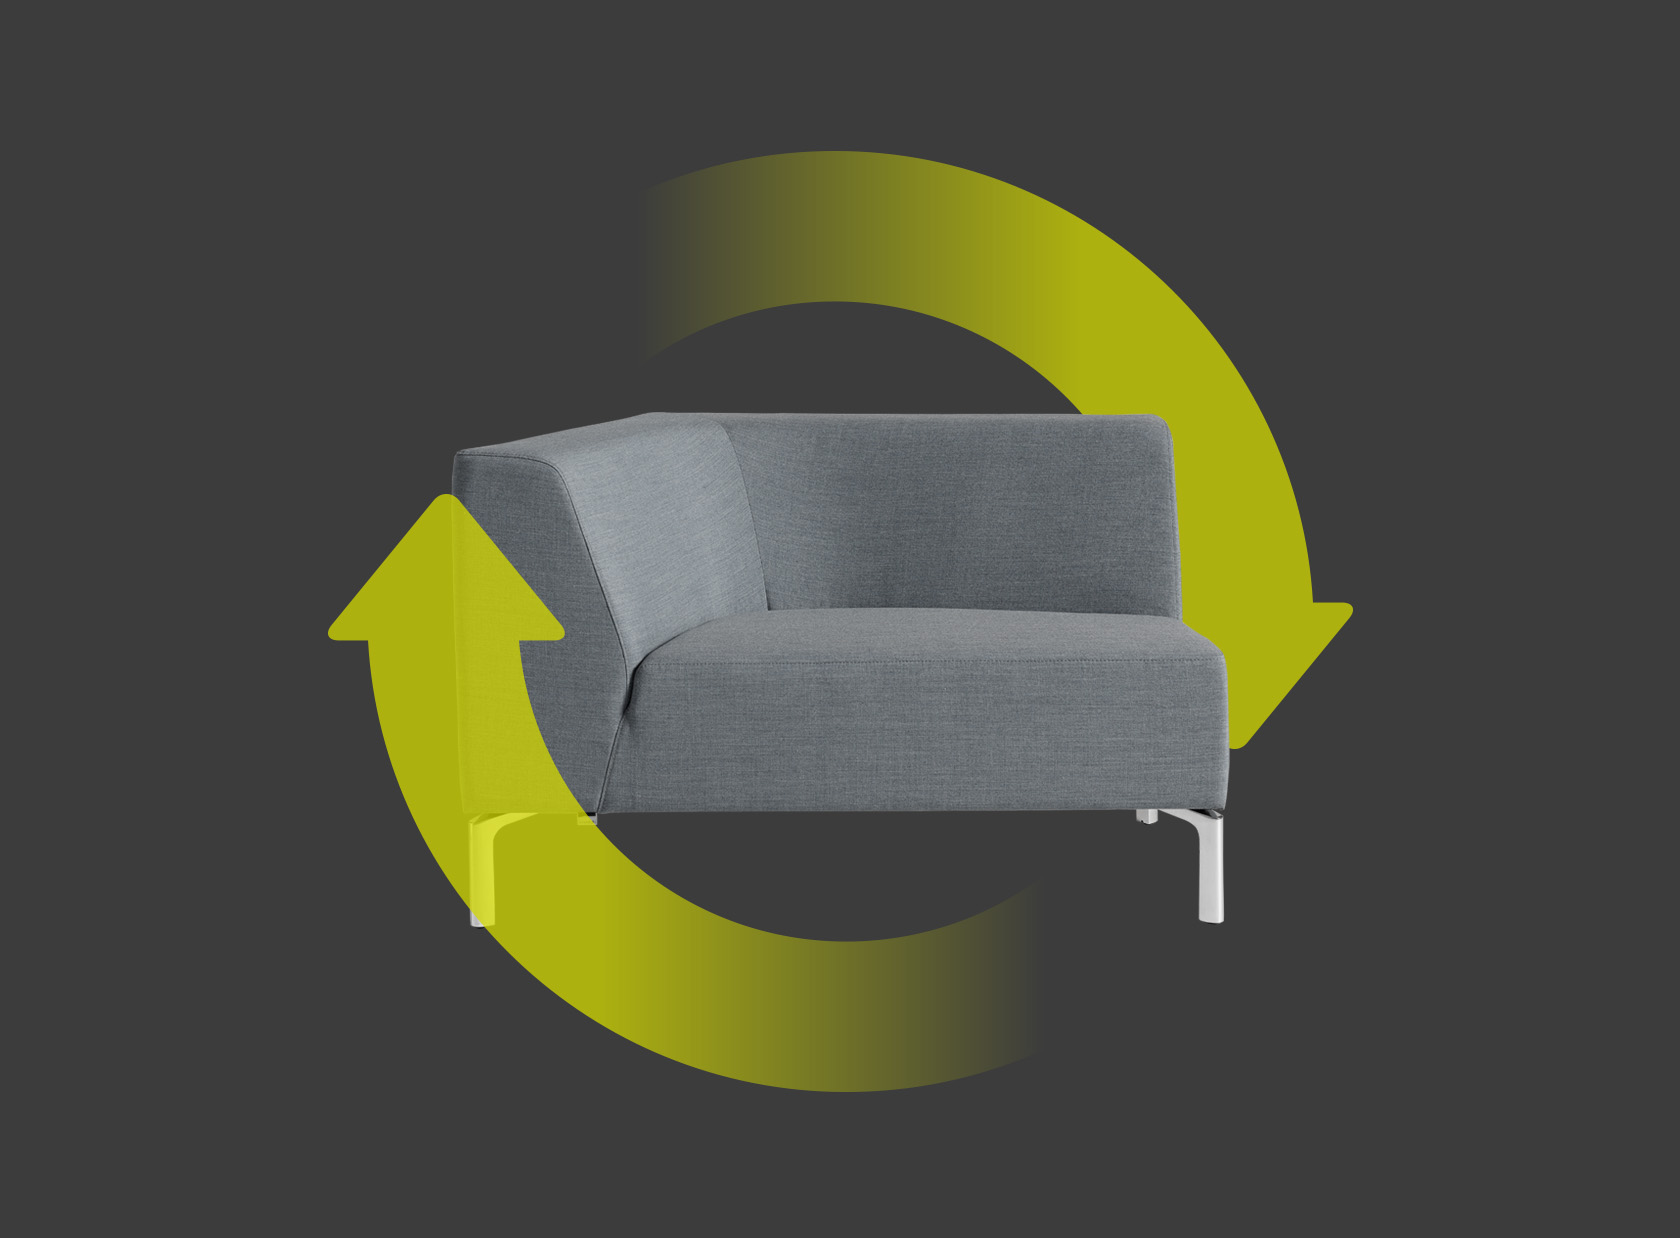 TANGRAM seating element on the right in grey, with two green arrows forming a circle around the seating element. These indicate the sustainability and reusability of the chair.